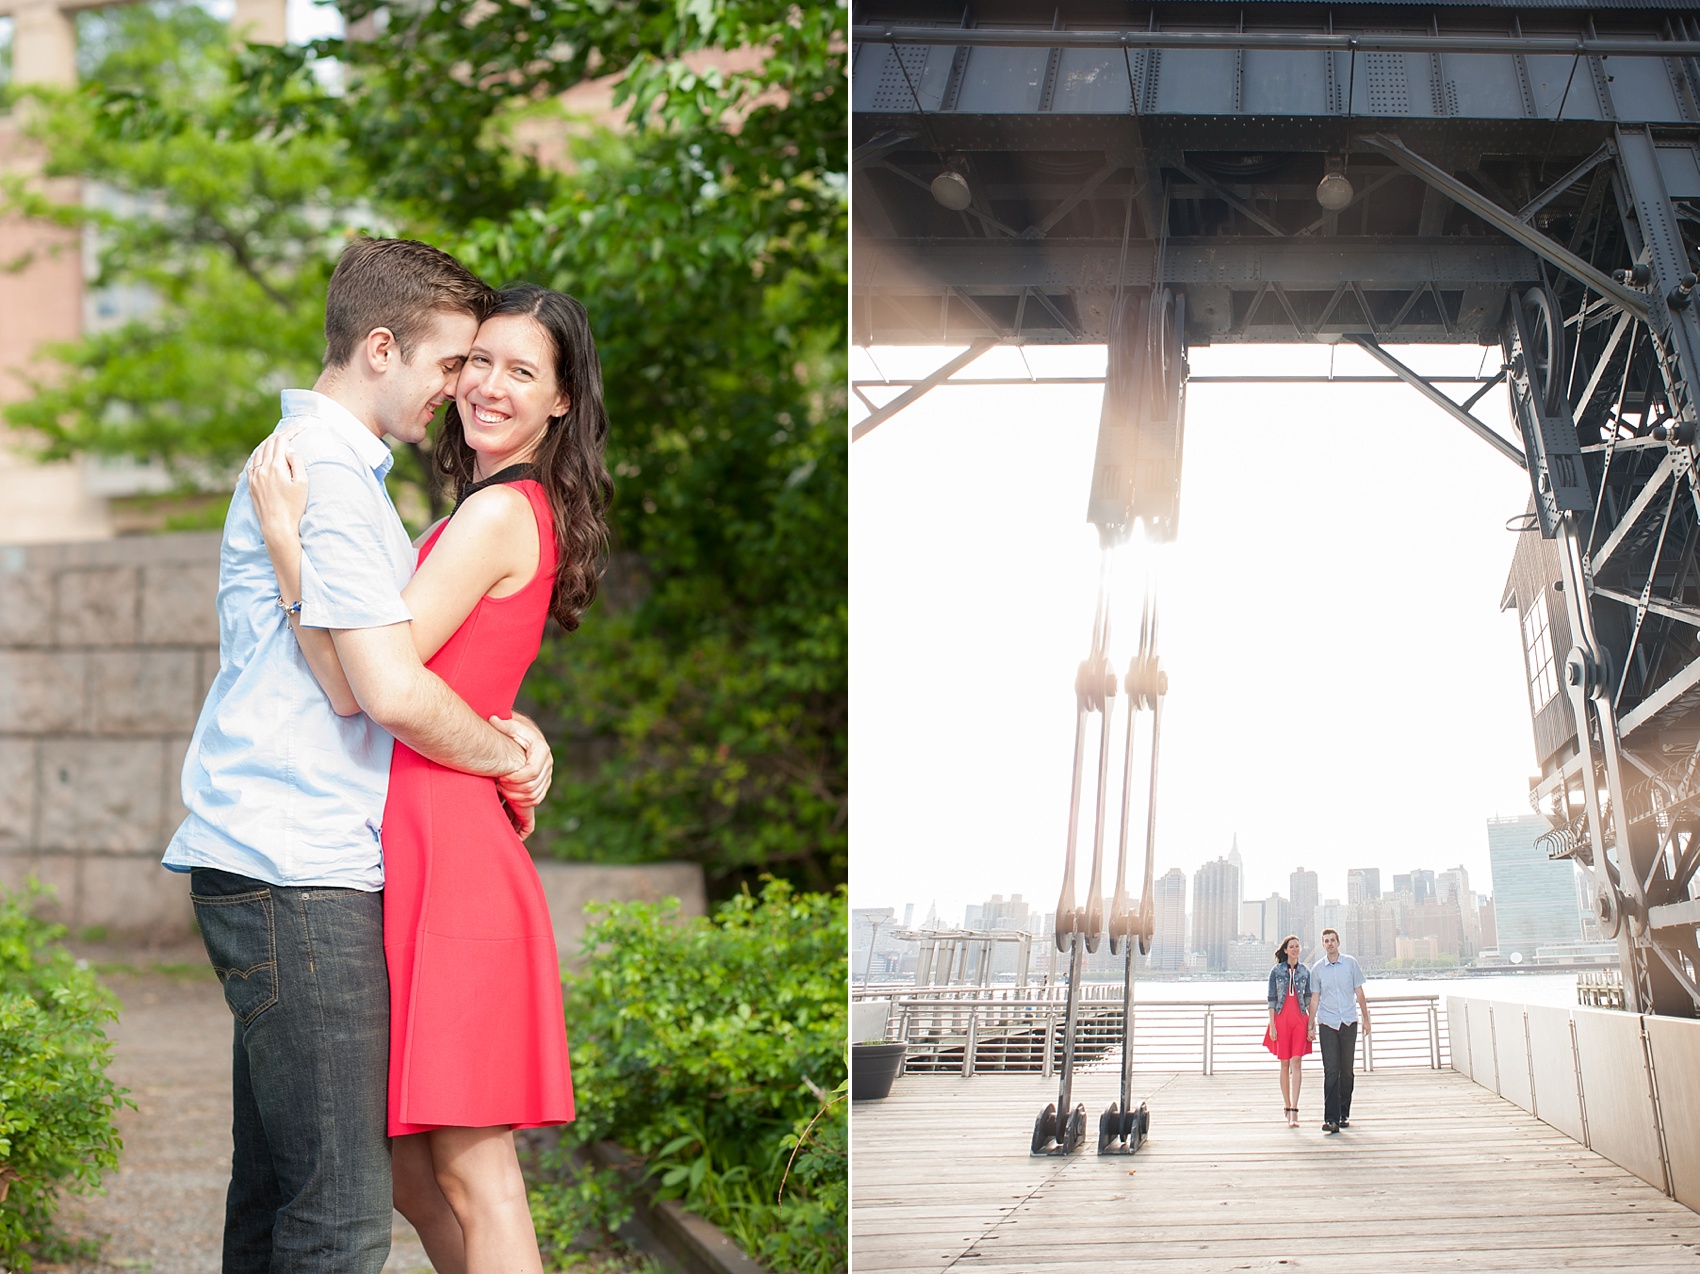 Long Island City waterfront engagement session at Gantry State Park by Mikkel Paige Photography, NYC wedding photographer.